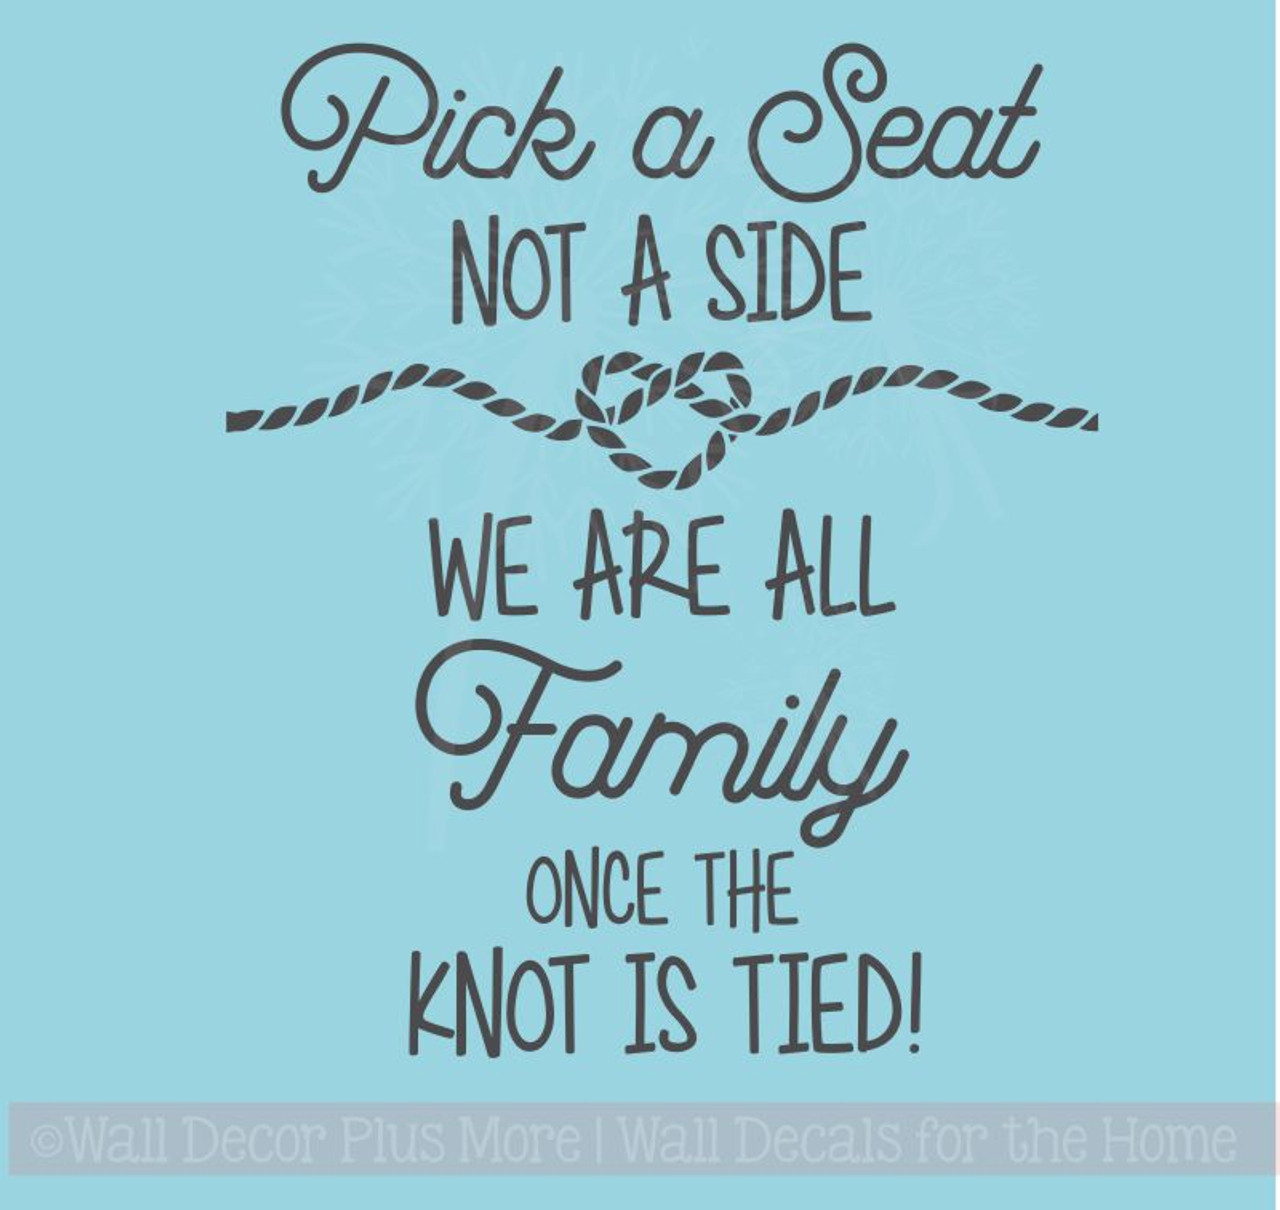 Pick a seat not a side wedding sign. Pick a seat not a side